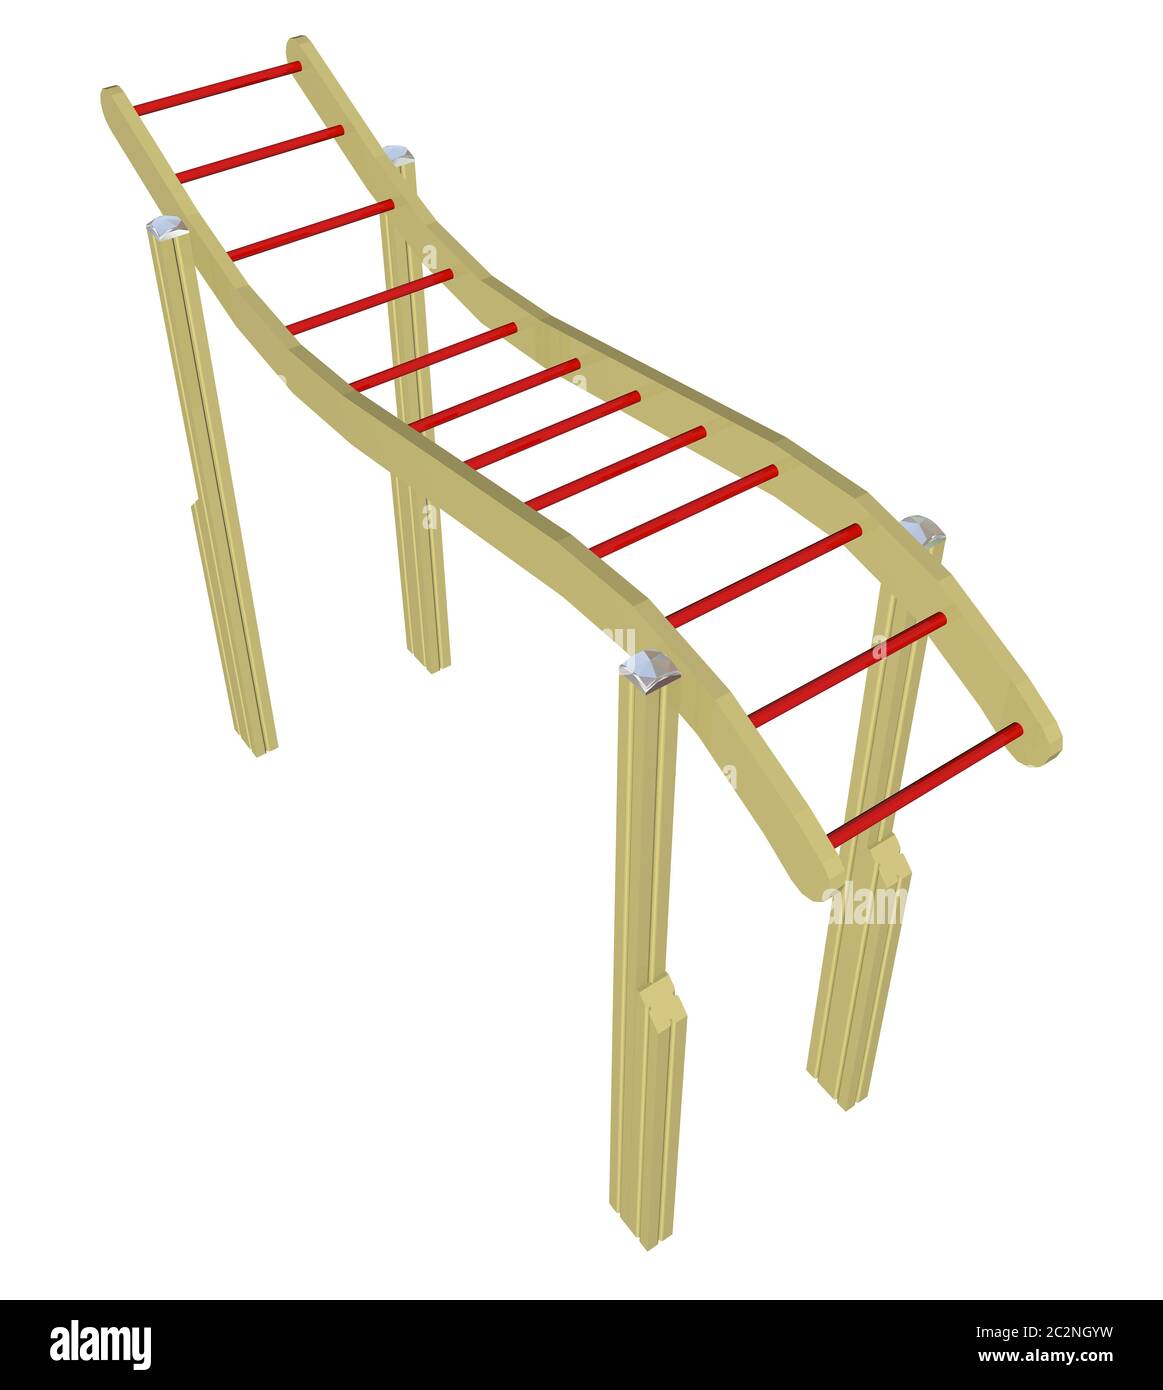 Monkey bars, red and yellow, 3D illustration, isolated against a white background. Stock Photo